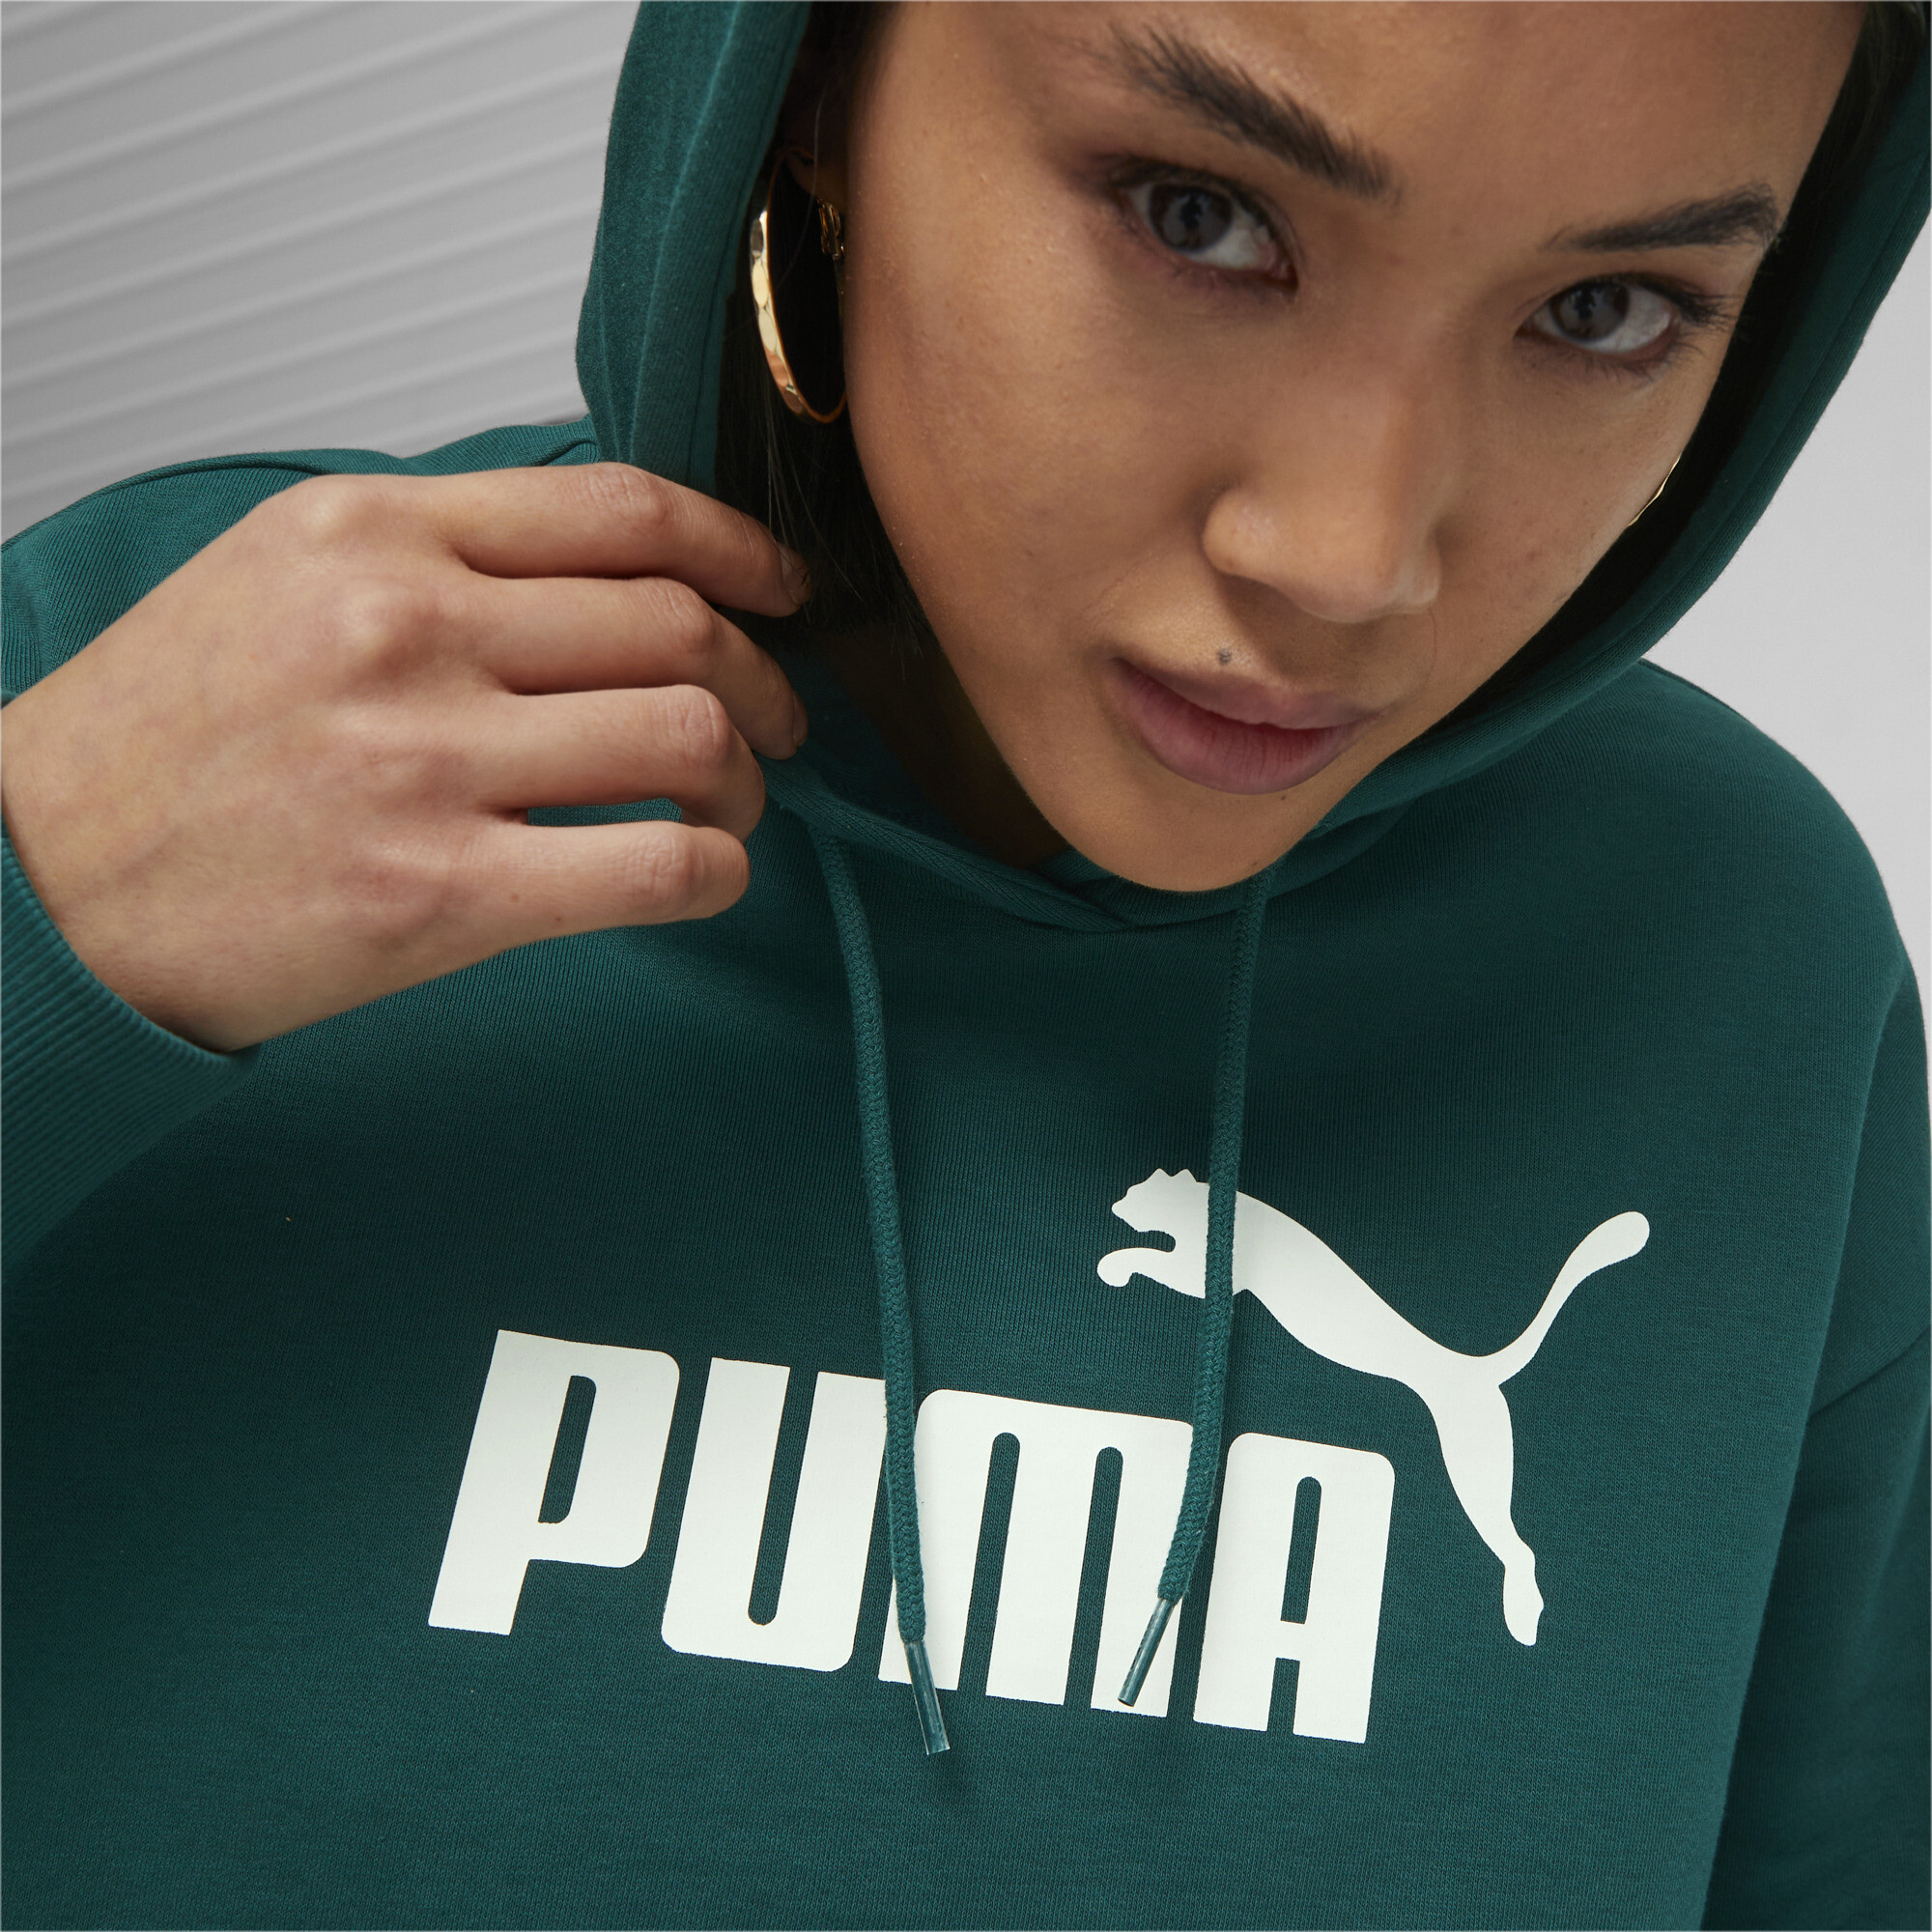 Women's Puma Essentials Cropped Logo's Hoodie, Green, Size S, Clothing